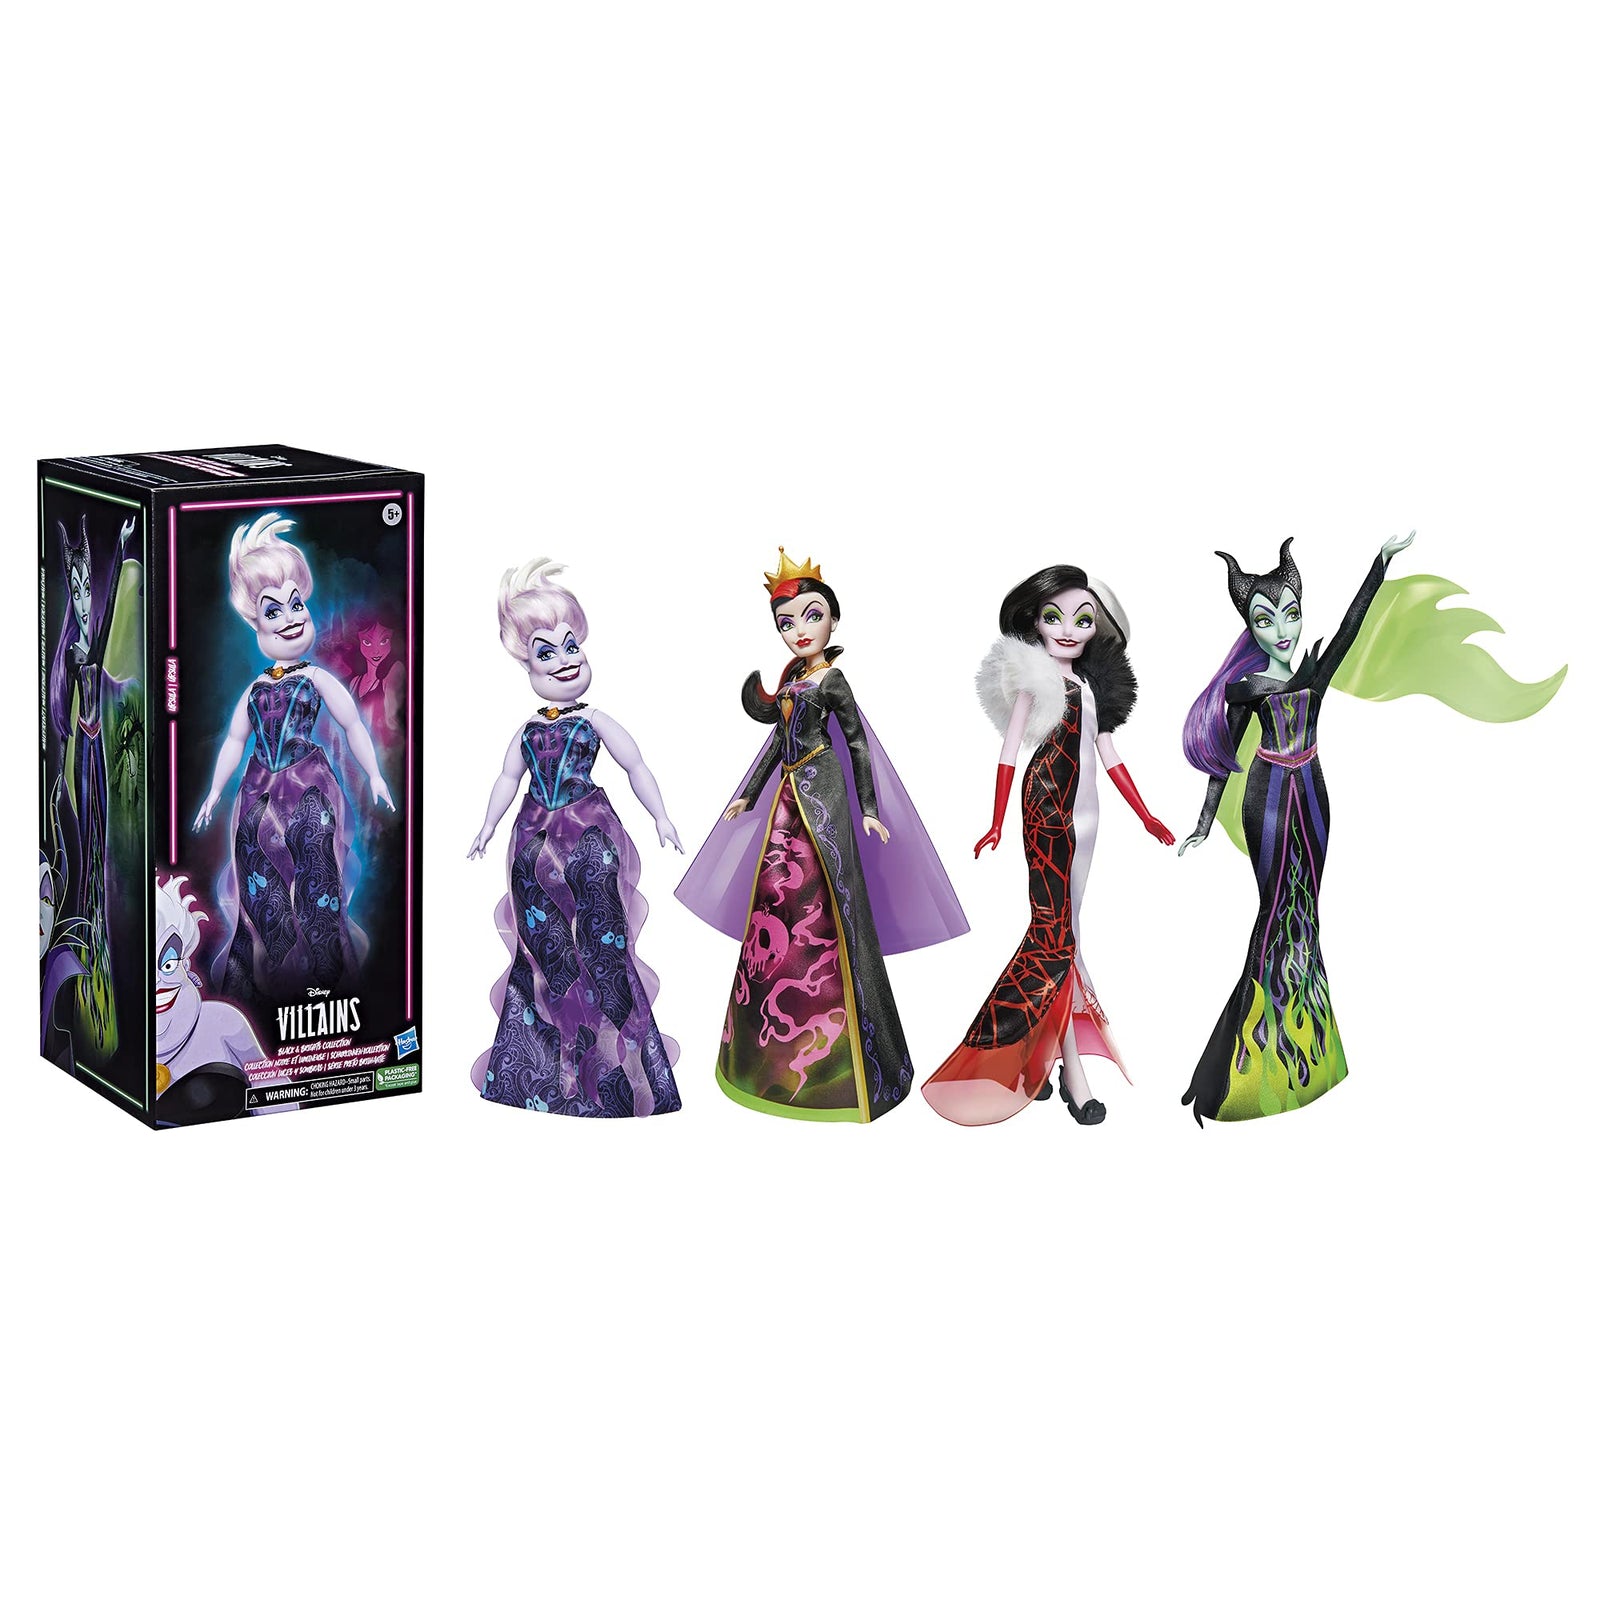 Disney Villains Black and Brights Collection, Fashion Doll 4 Pack, Disney Villains Toy for Kids 5 Years Old and Up (Amazon Exclusive)